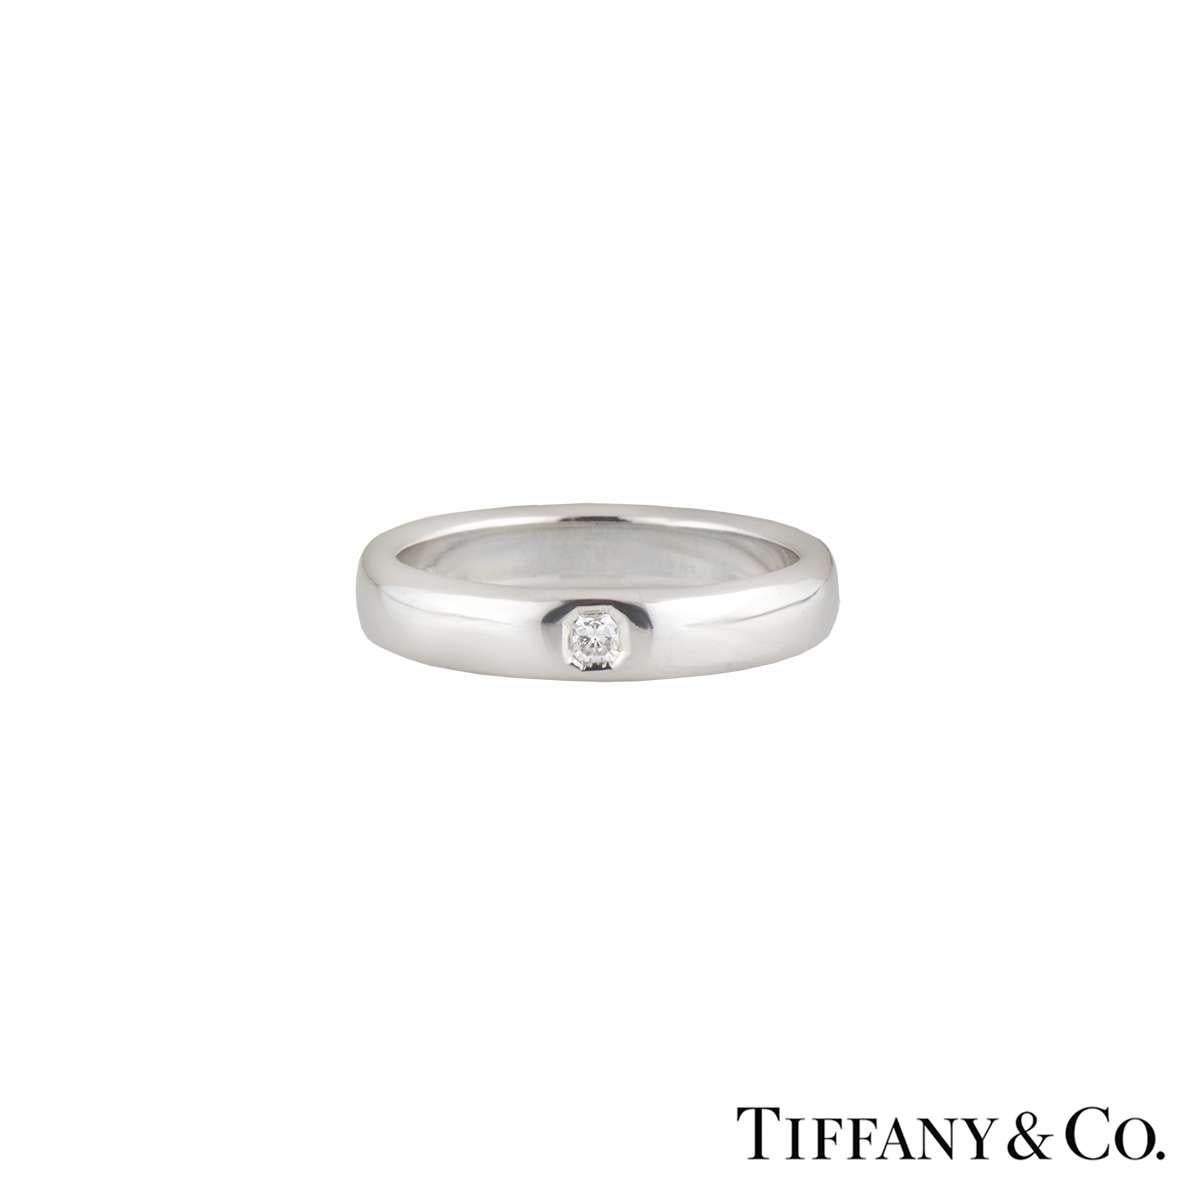 A stylish Tiffany & Co Diamond Wedding Band in Platinum from the Lucida collection. The ring features a bezel set Lucida cut diamond with a total weight of 0.05ct, G colour and VS clarity. The 4mm wide ring is a court fit band in a size UK M½/US